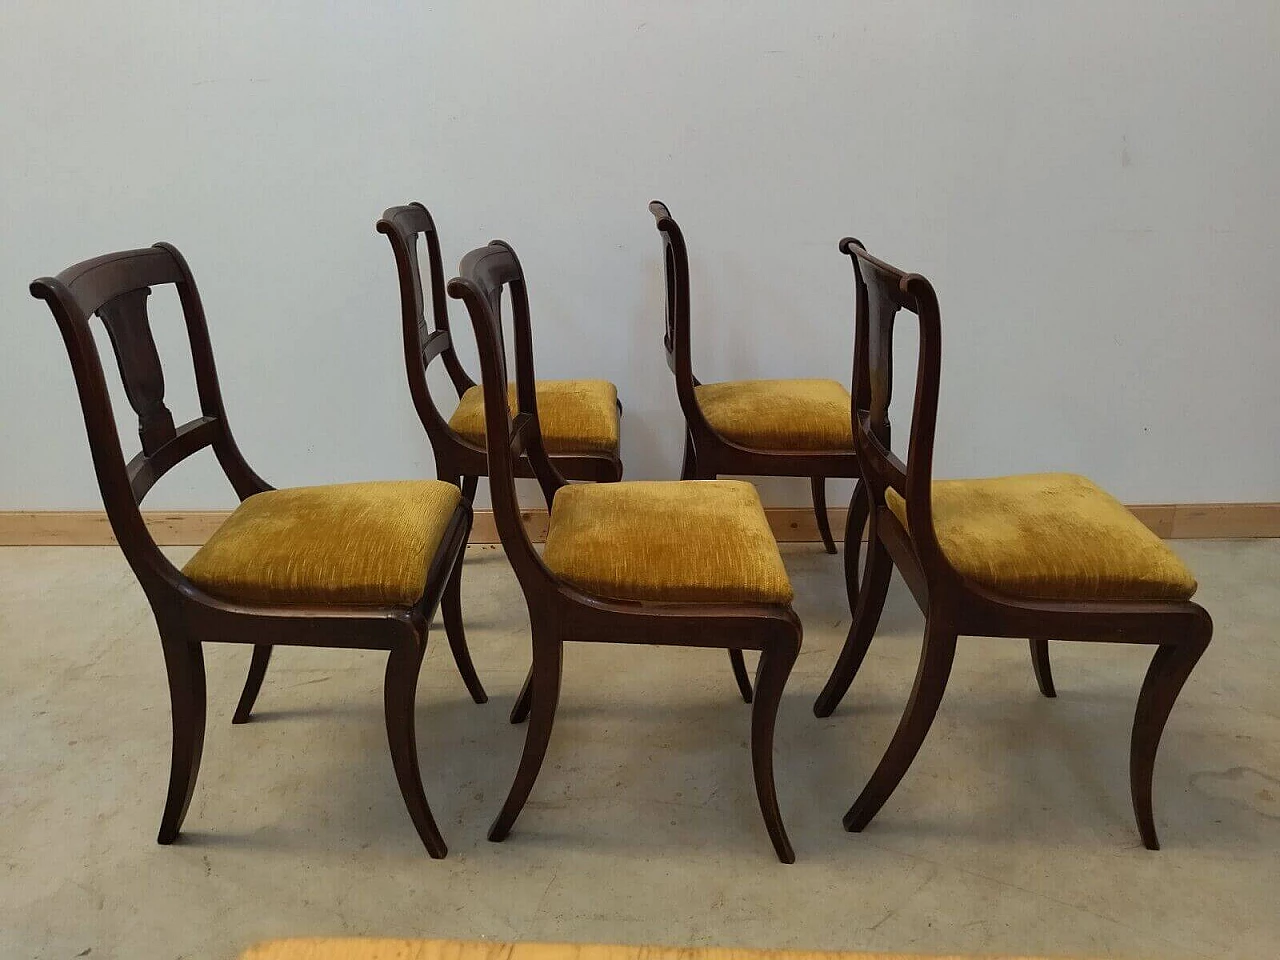 5 Empire-style walnut chairs, early 20th century 10